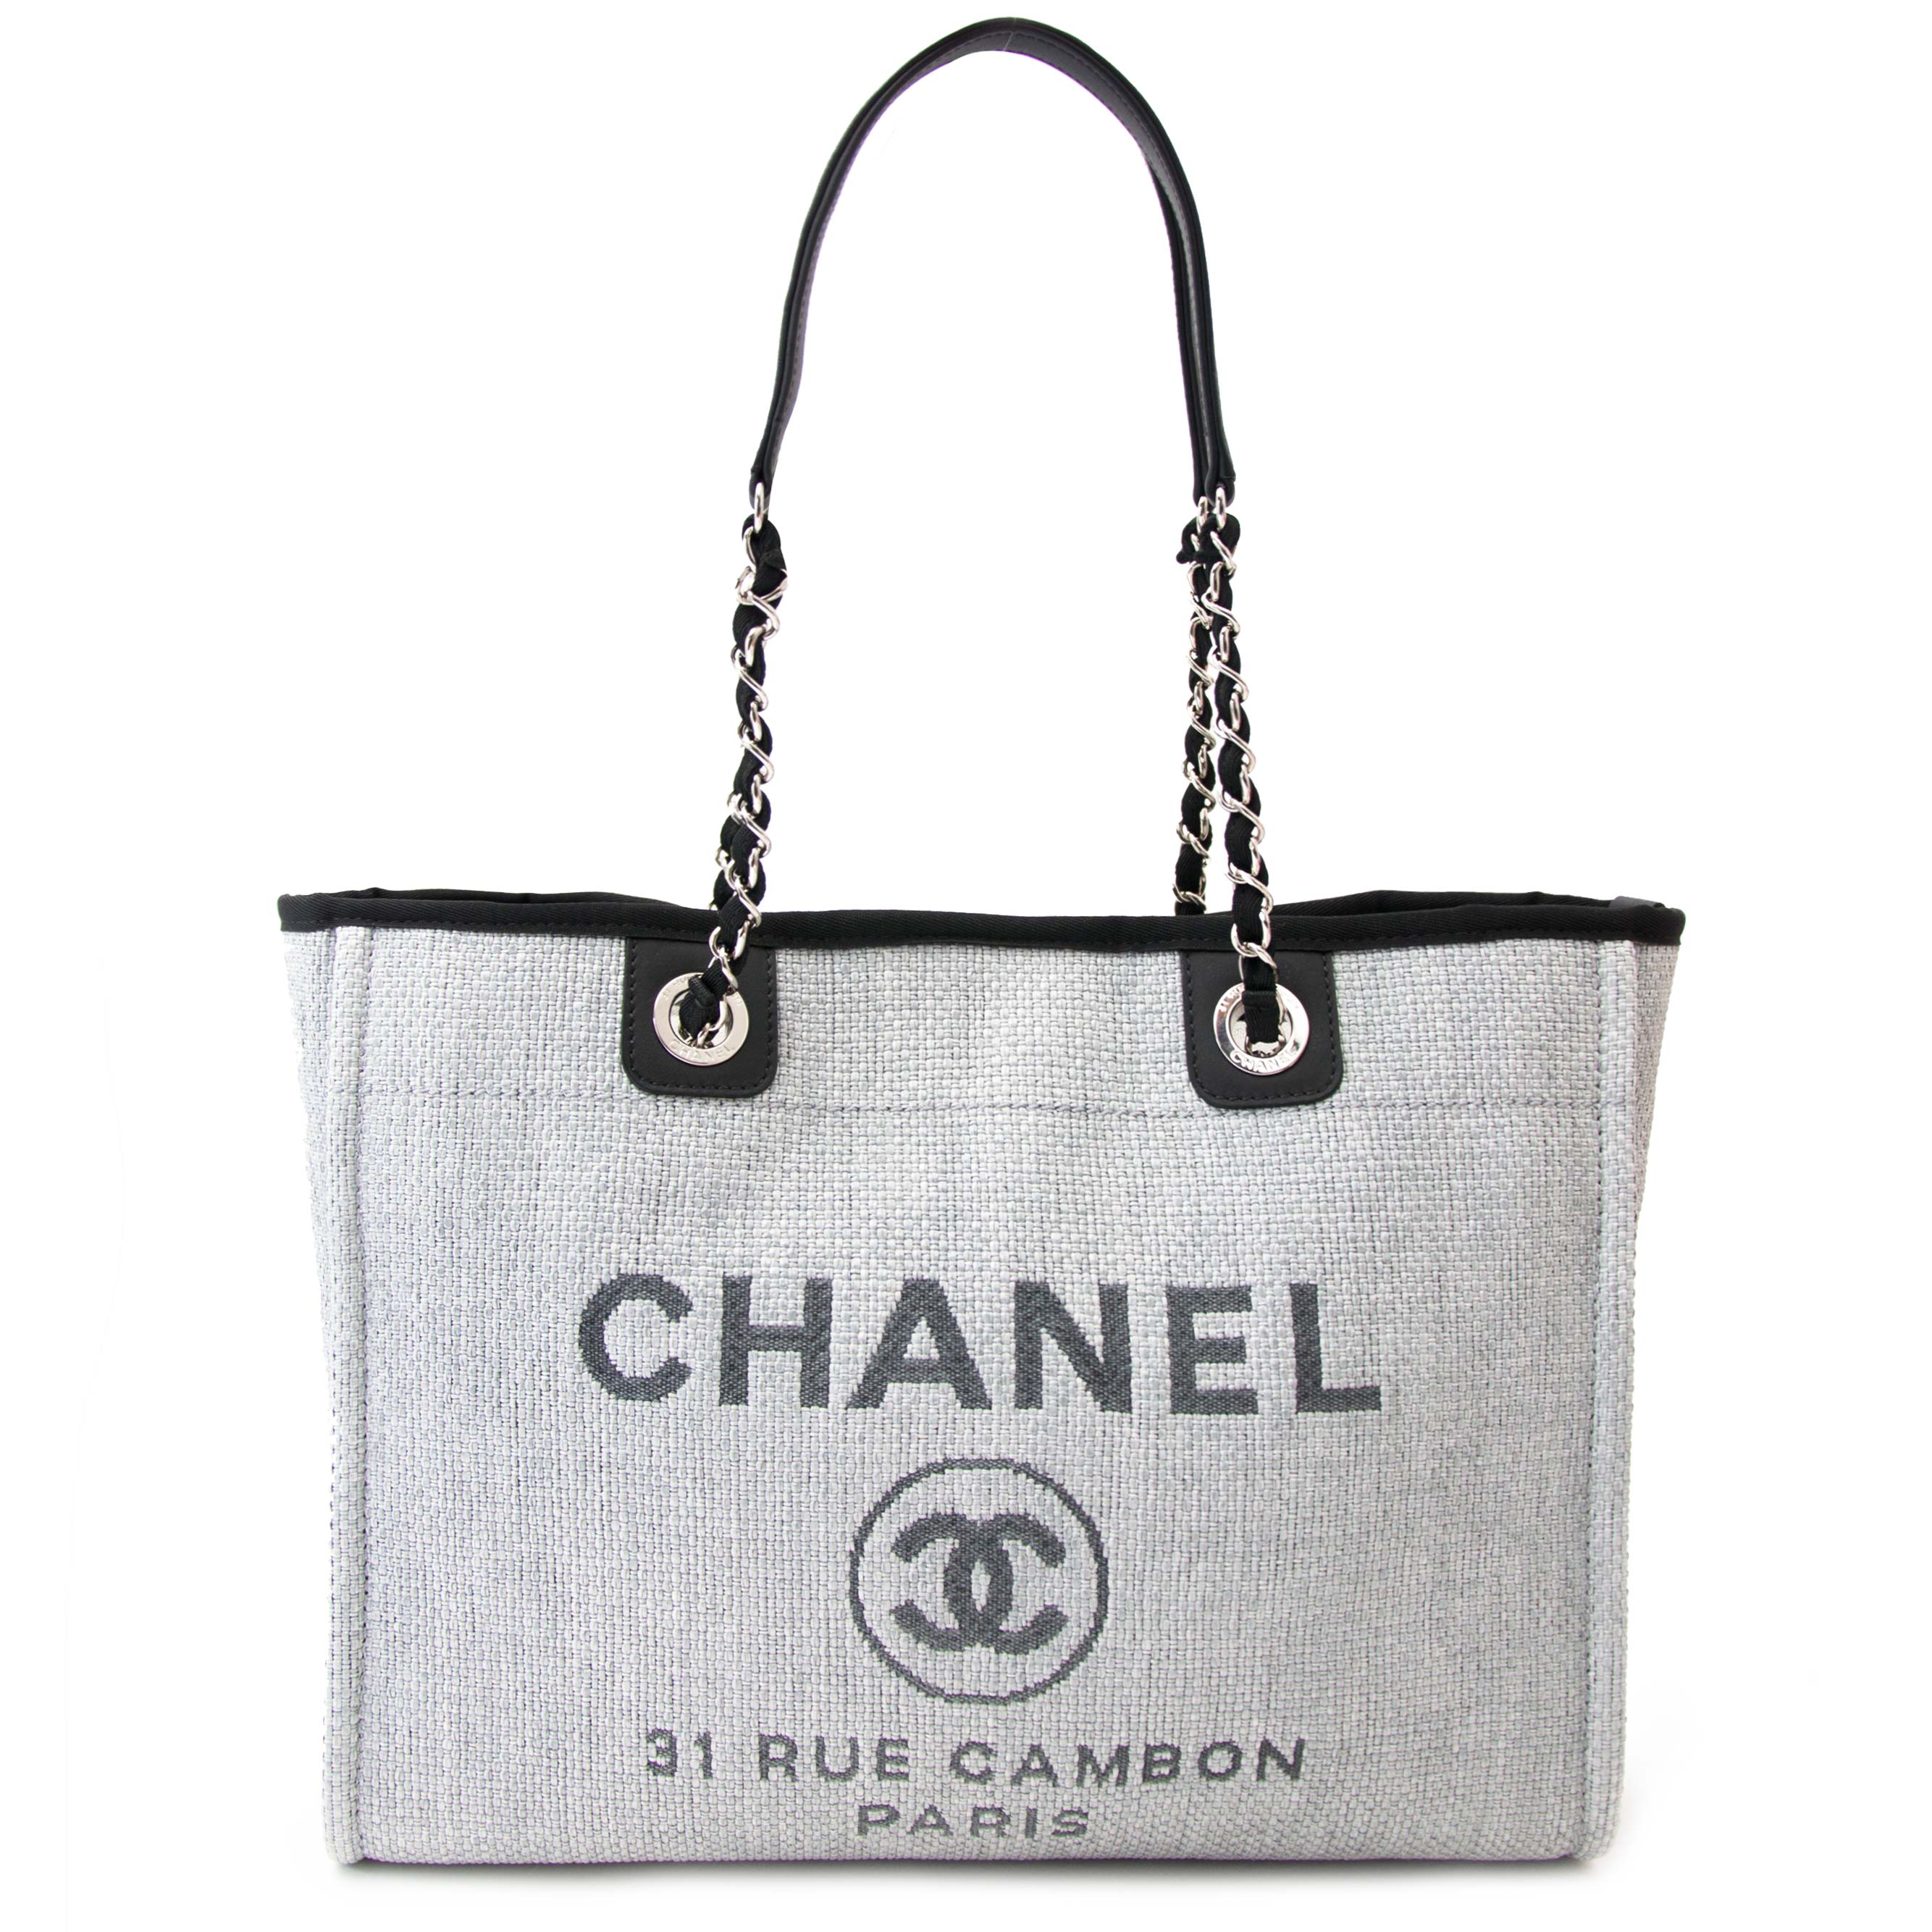 Bonhams  CHANEL 31 RUE CAMBON SHOPPING TOTEWHITE LEATHER includes serial  sticker authenticity card original dust bag